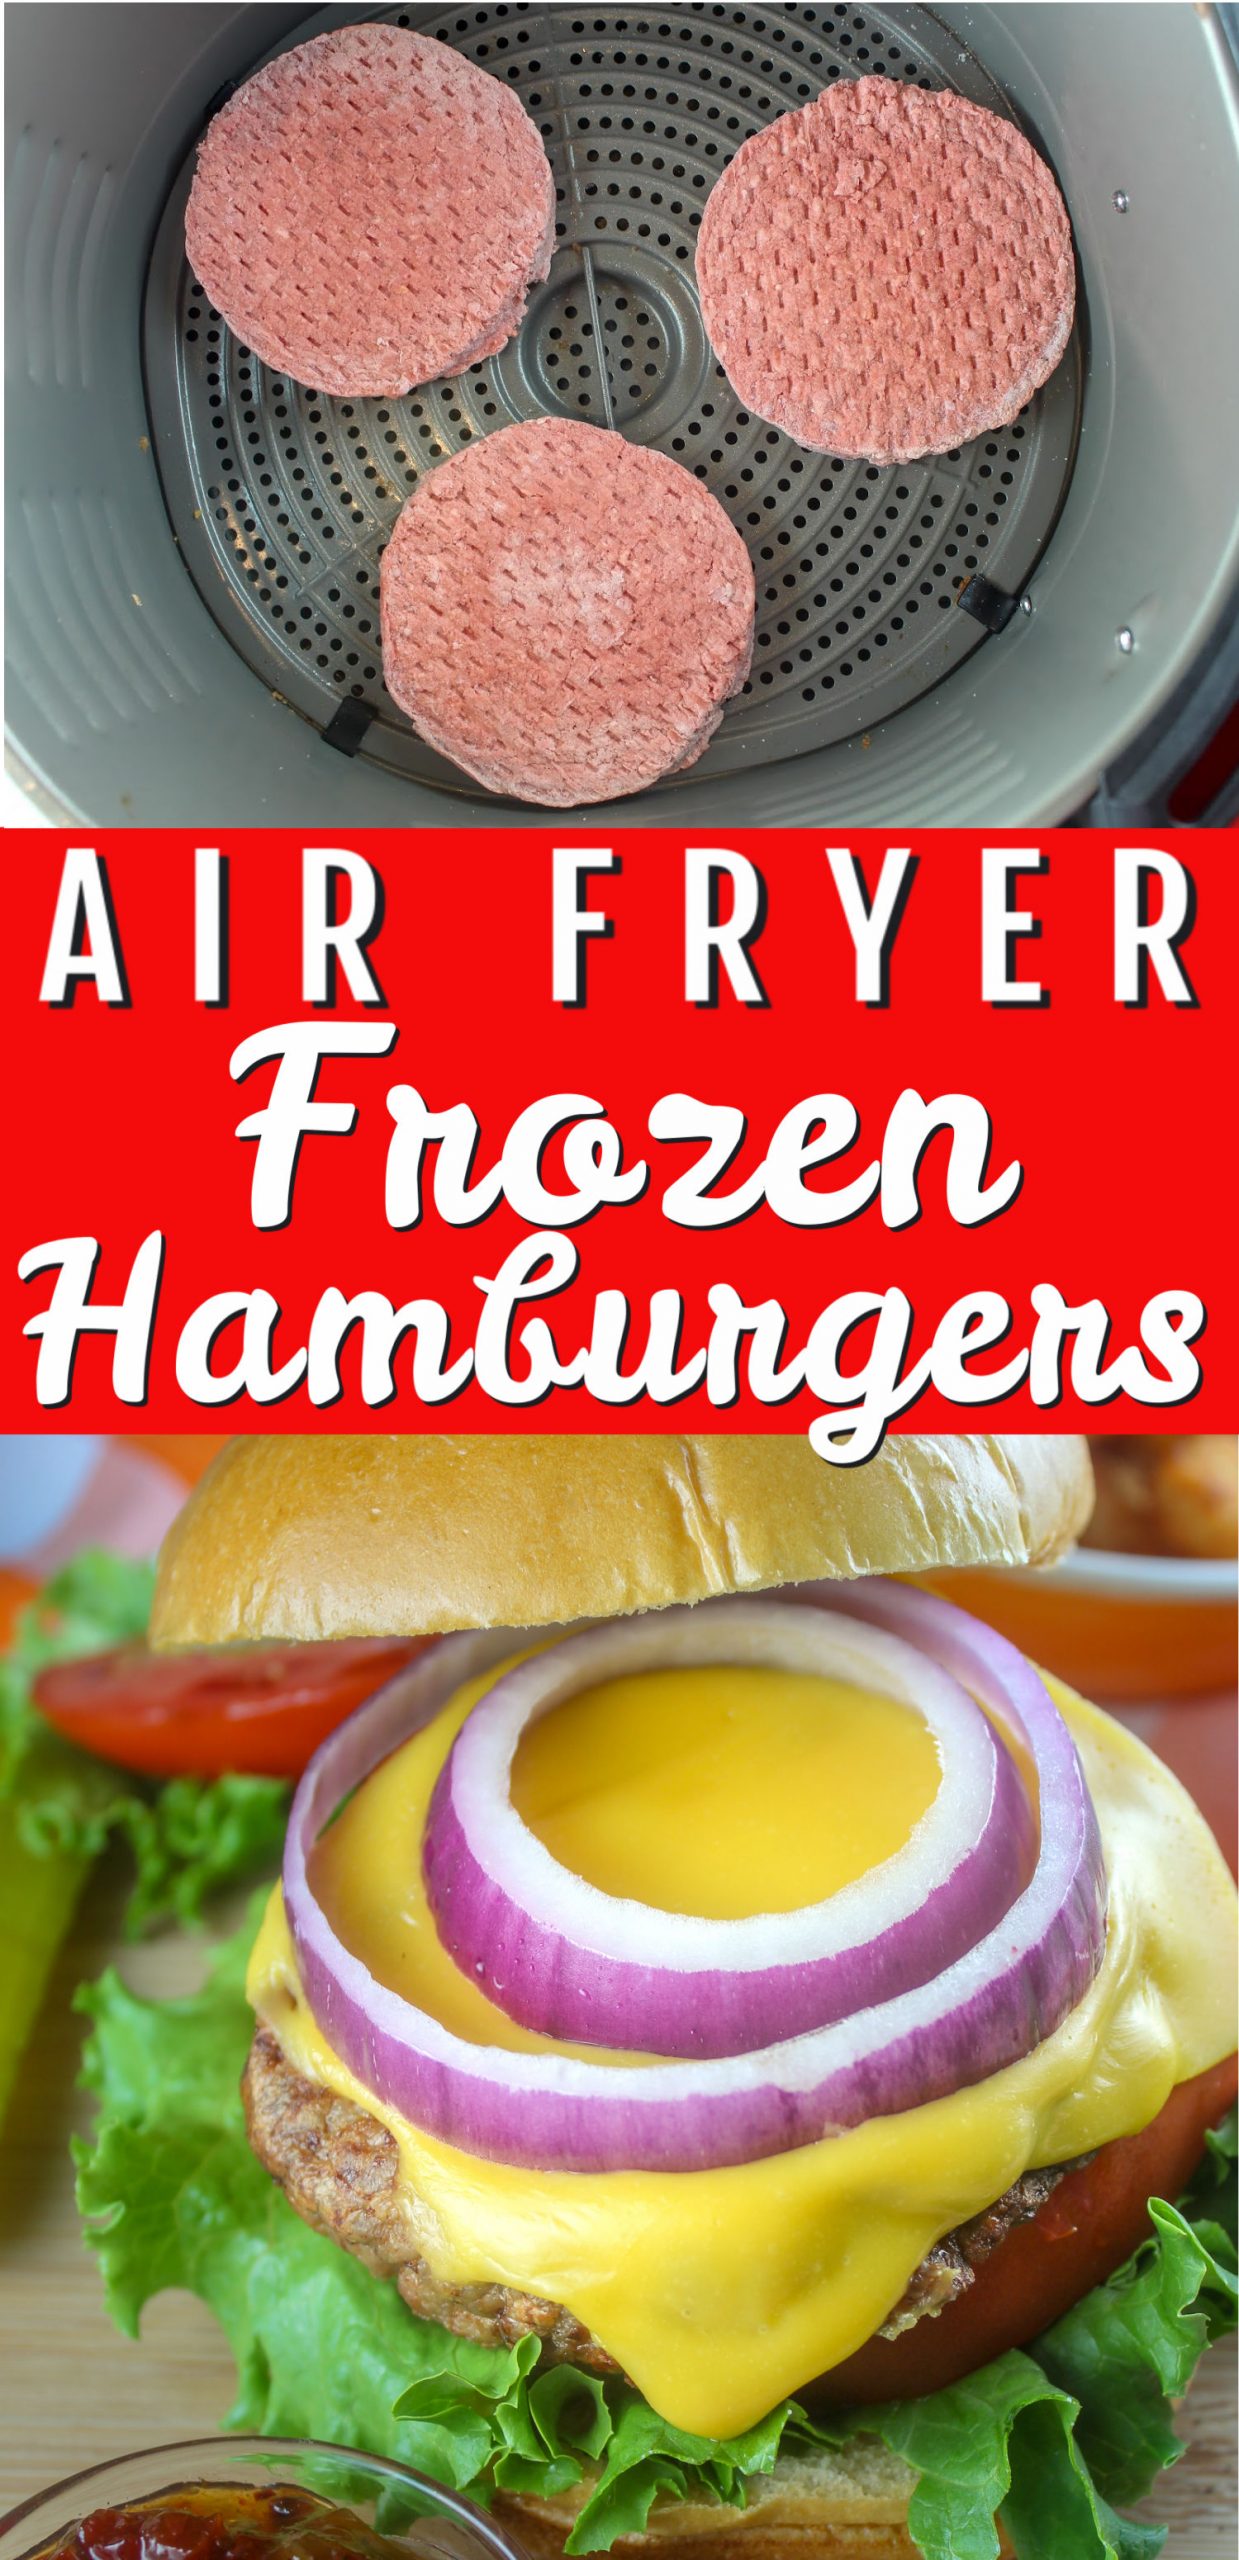 Dinner just got easier - making frozen hamburgers in your air fryer means burgers in 15 minutes with no work! Freezer to table in no time! via @foodhussy